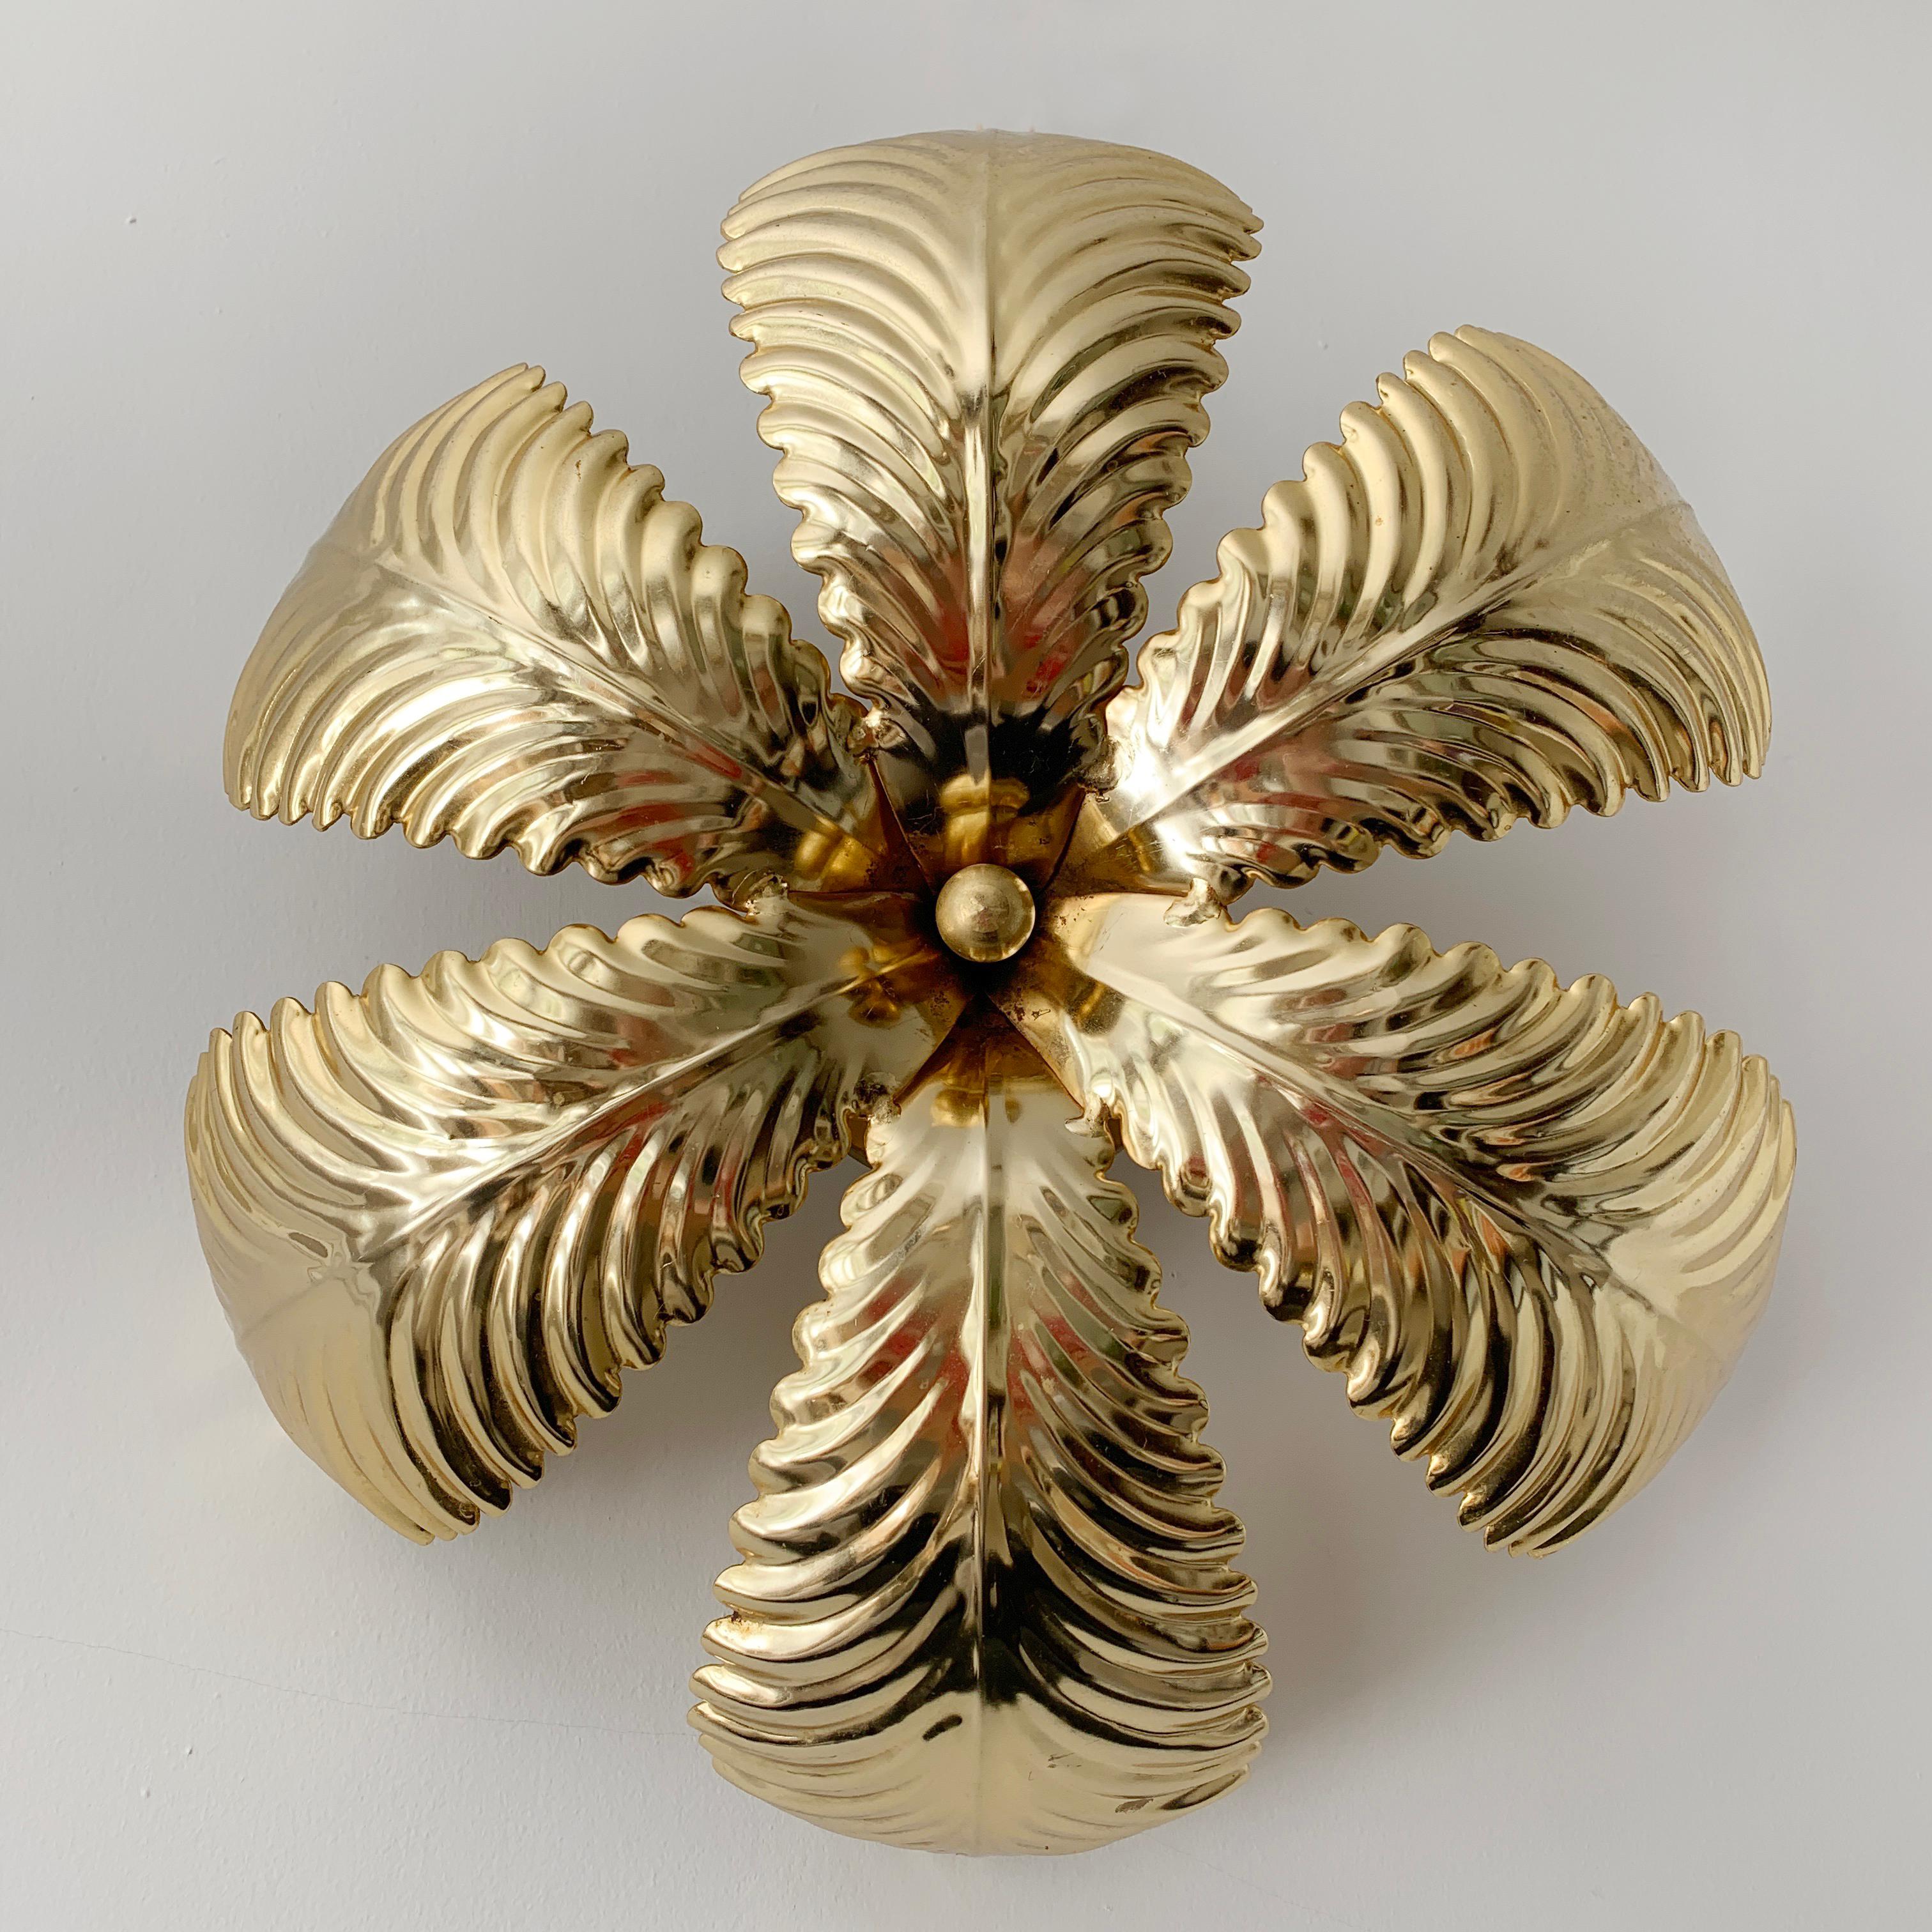 Palm leaf flush ceiling light, 1980s. Shiny gold metal palm leaf ceiling light. Behind the leaves are 3 bulb holders. There is a gold ceiling rose with hanging hook inside. Measures: 40cm width, 12cm depth. There are 2 small holes on one side of the